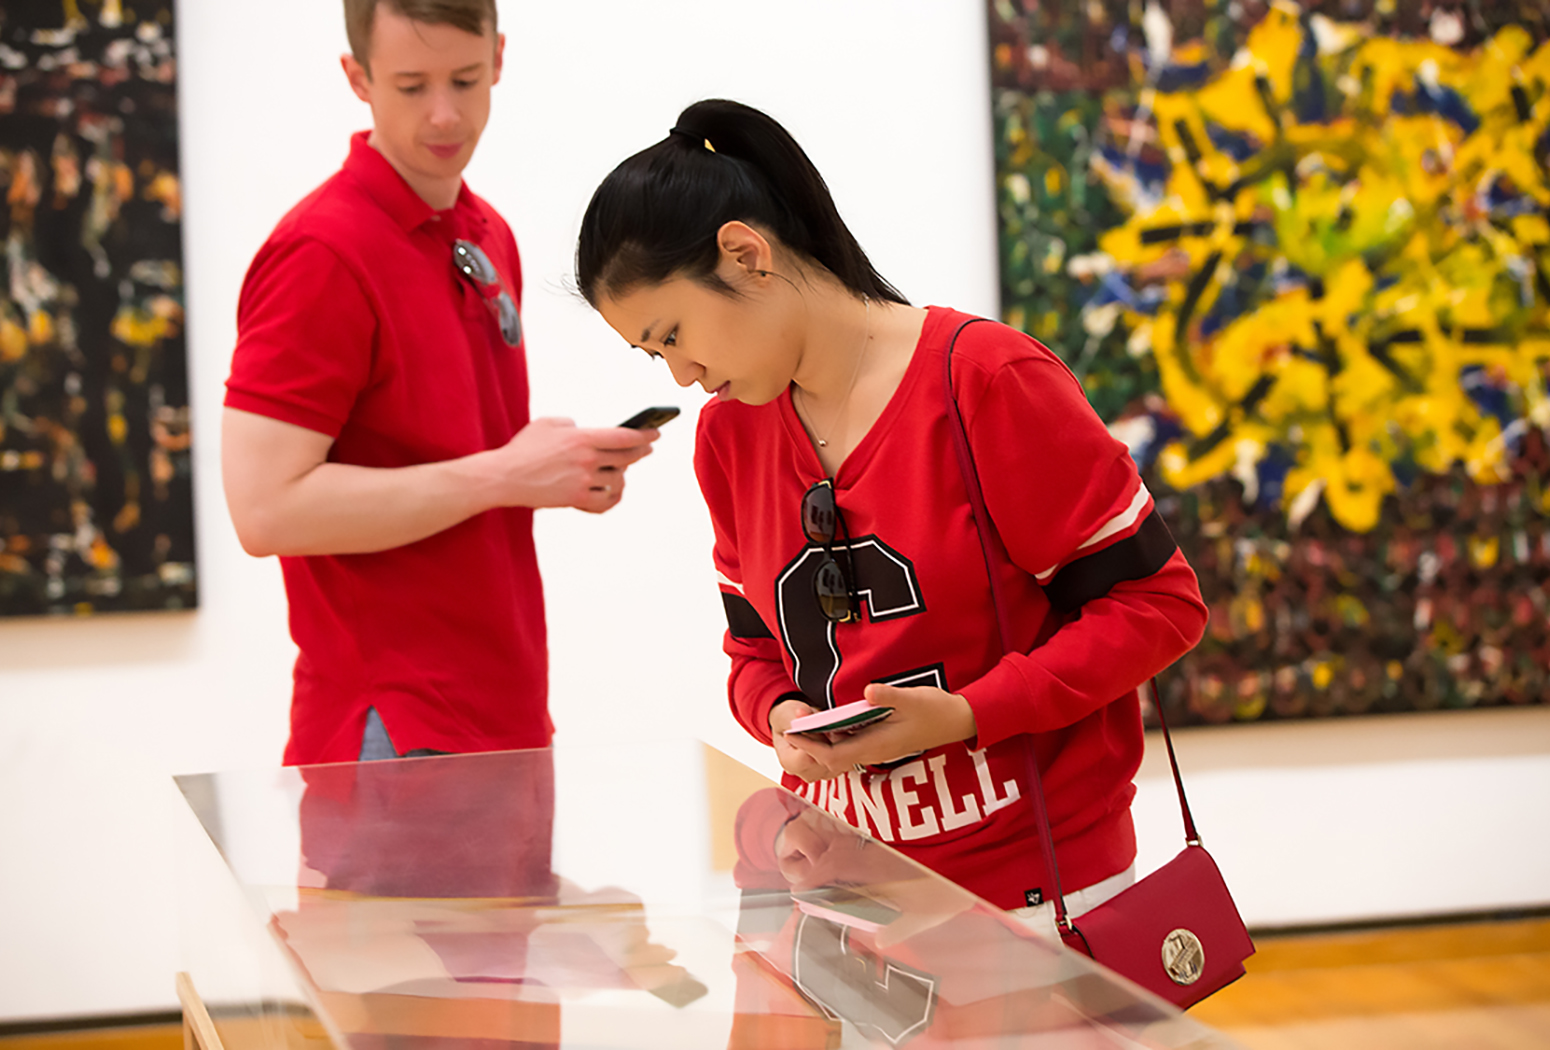 A man and woman in red shirts look at art in a gallery